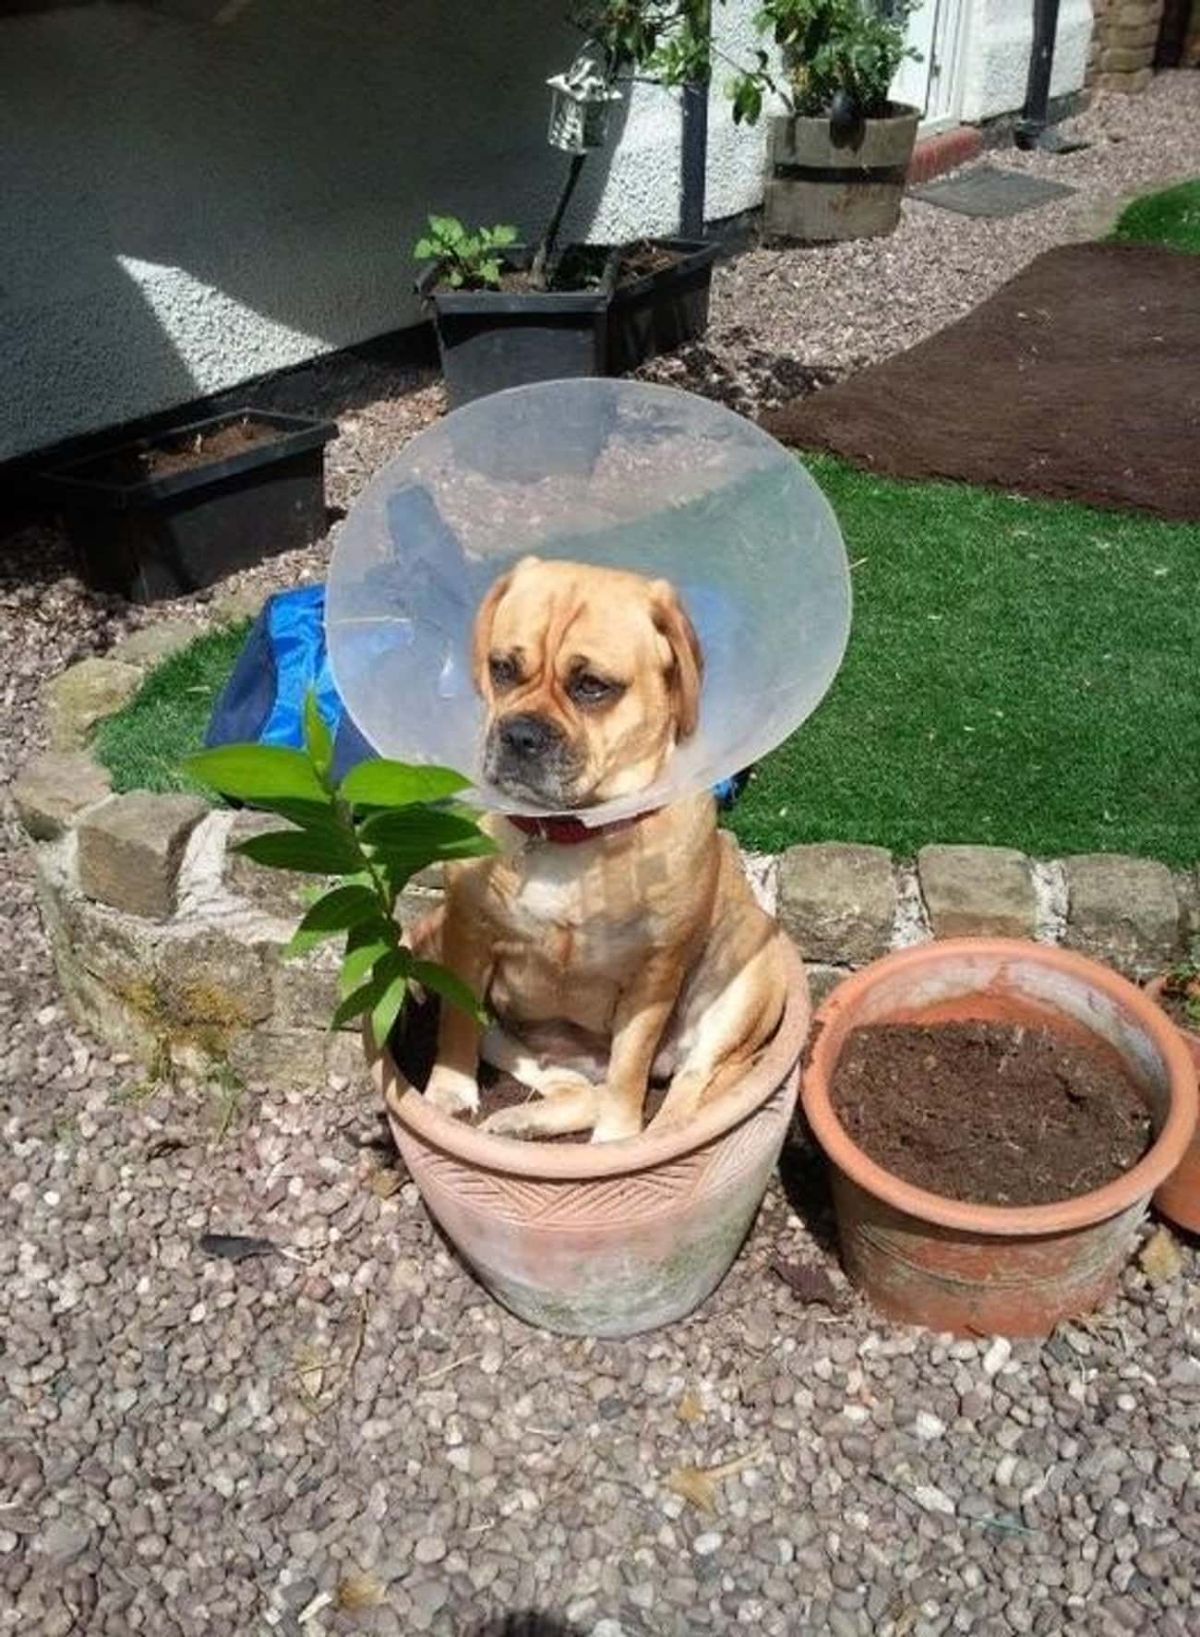 brown dog wearing an elizabethan collar sitting on a brown pot with a plant in it in a garden